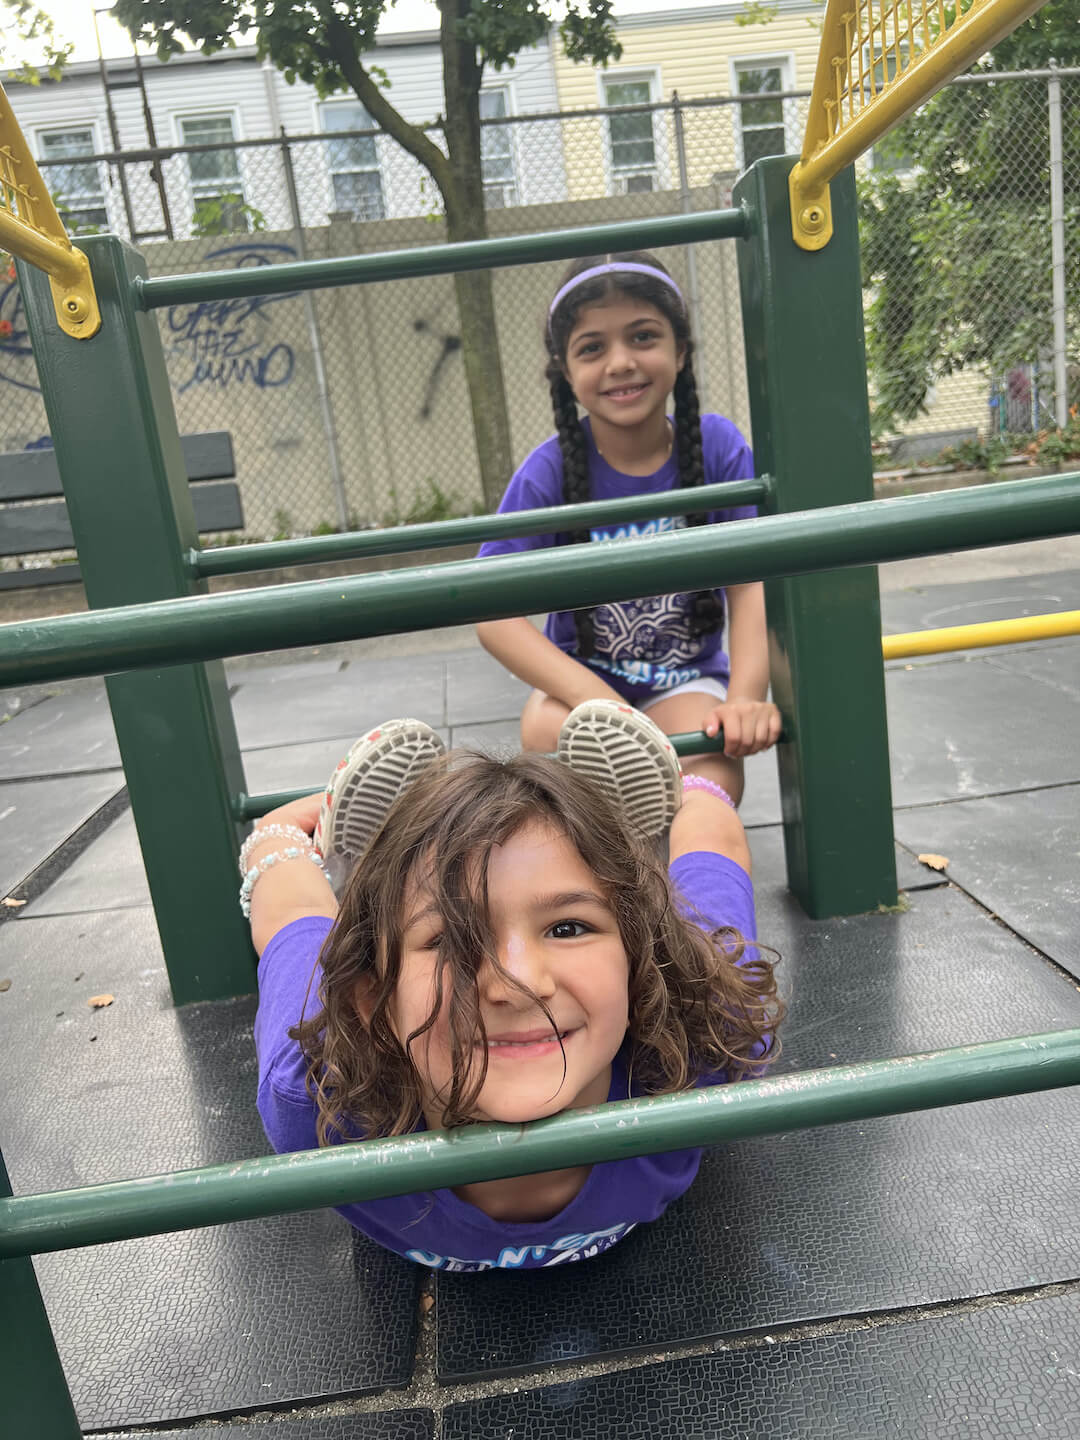 k-2 summer steam camp student at the park having fun